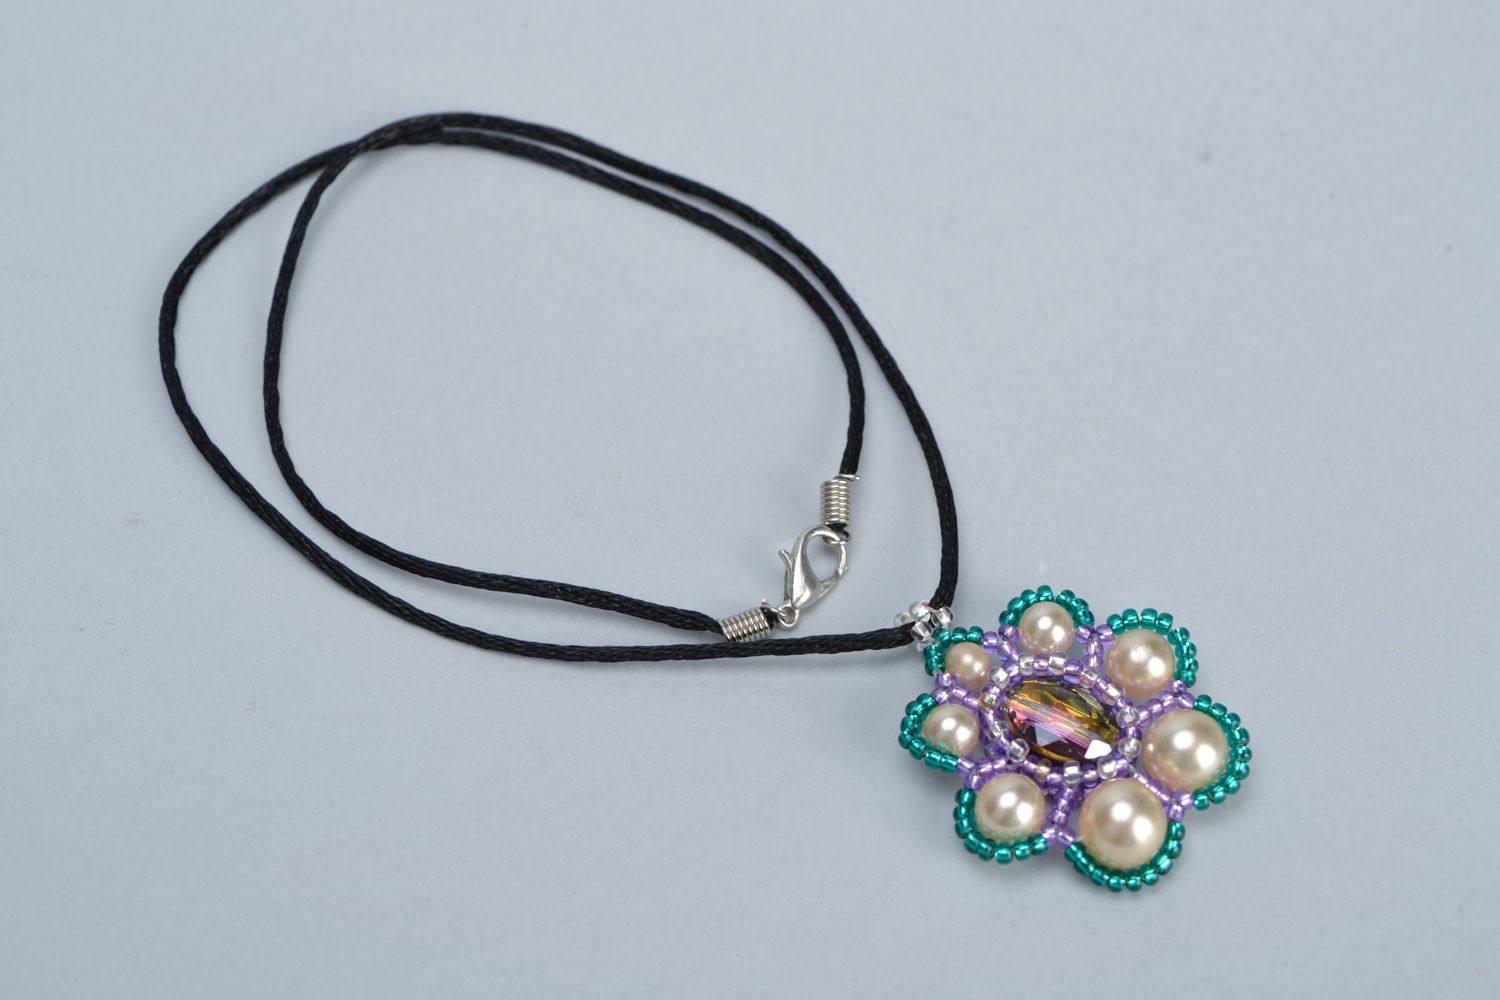 Beaded flower pendant with simple cord photo 4